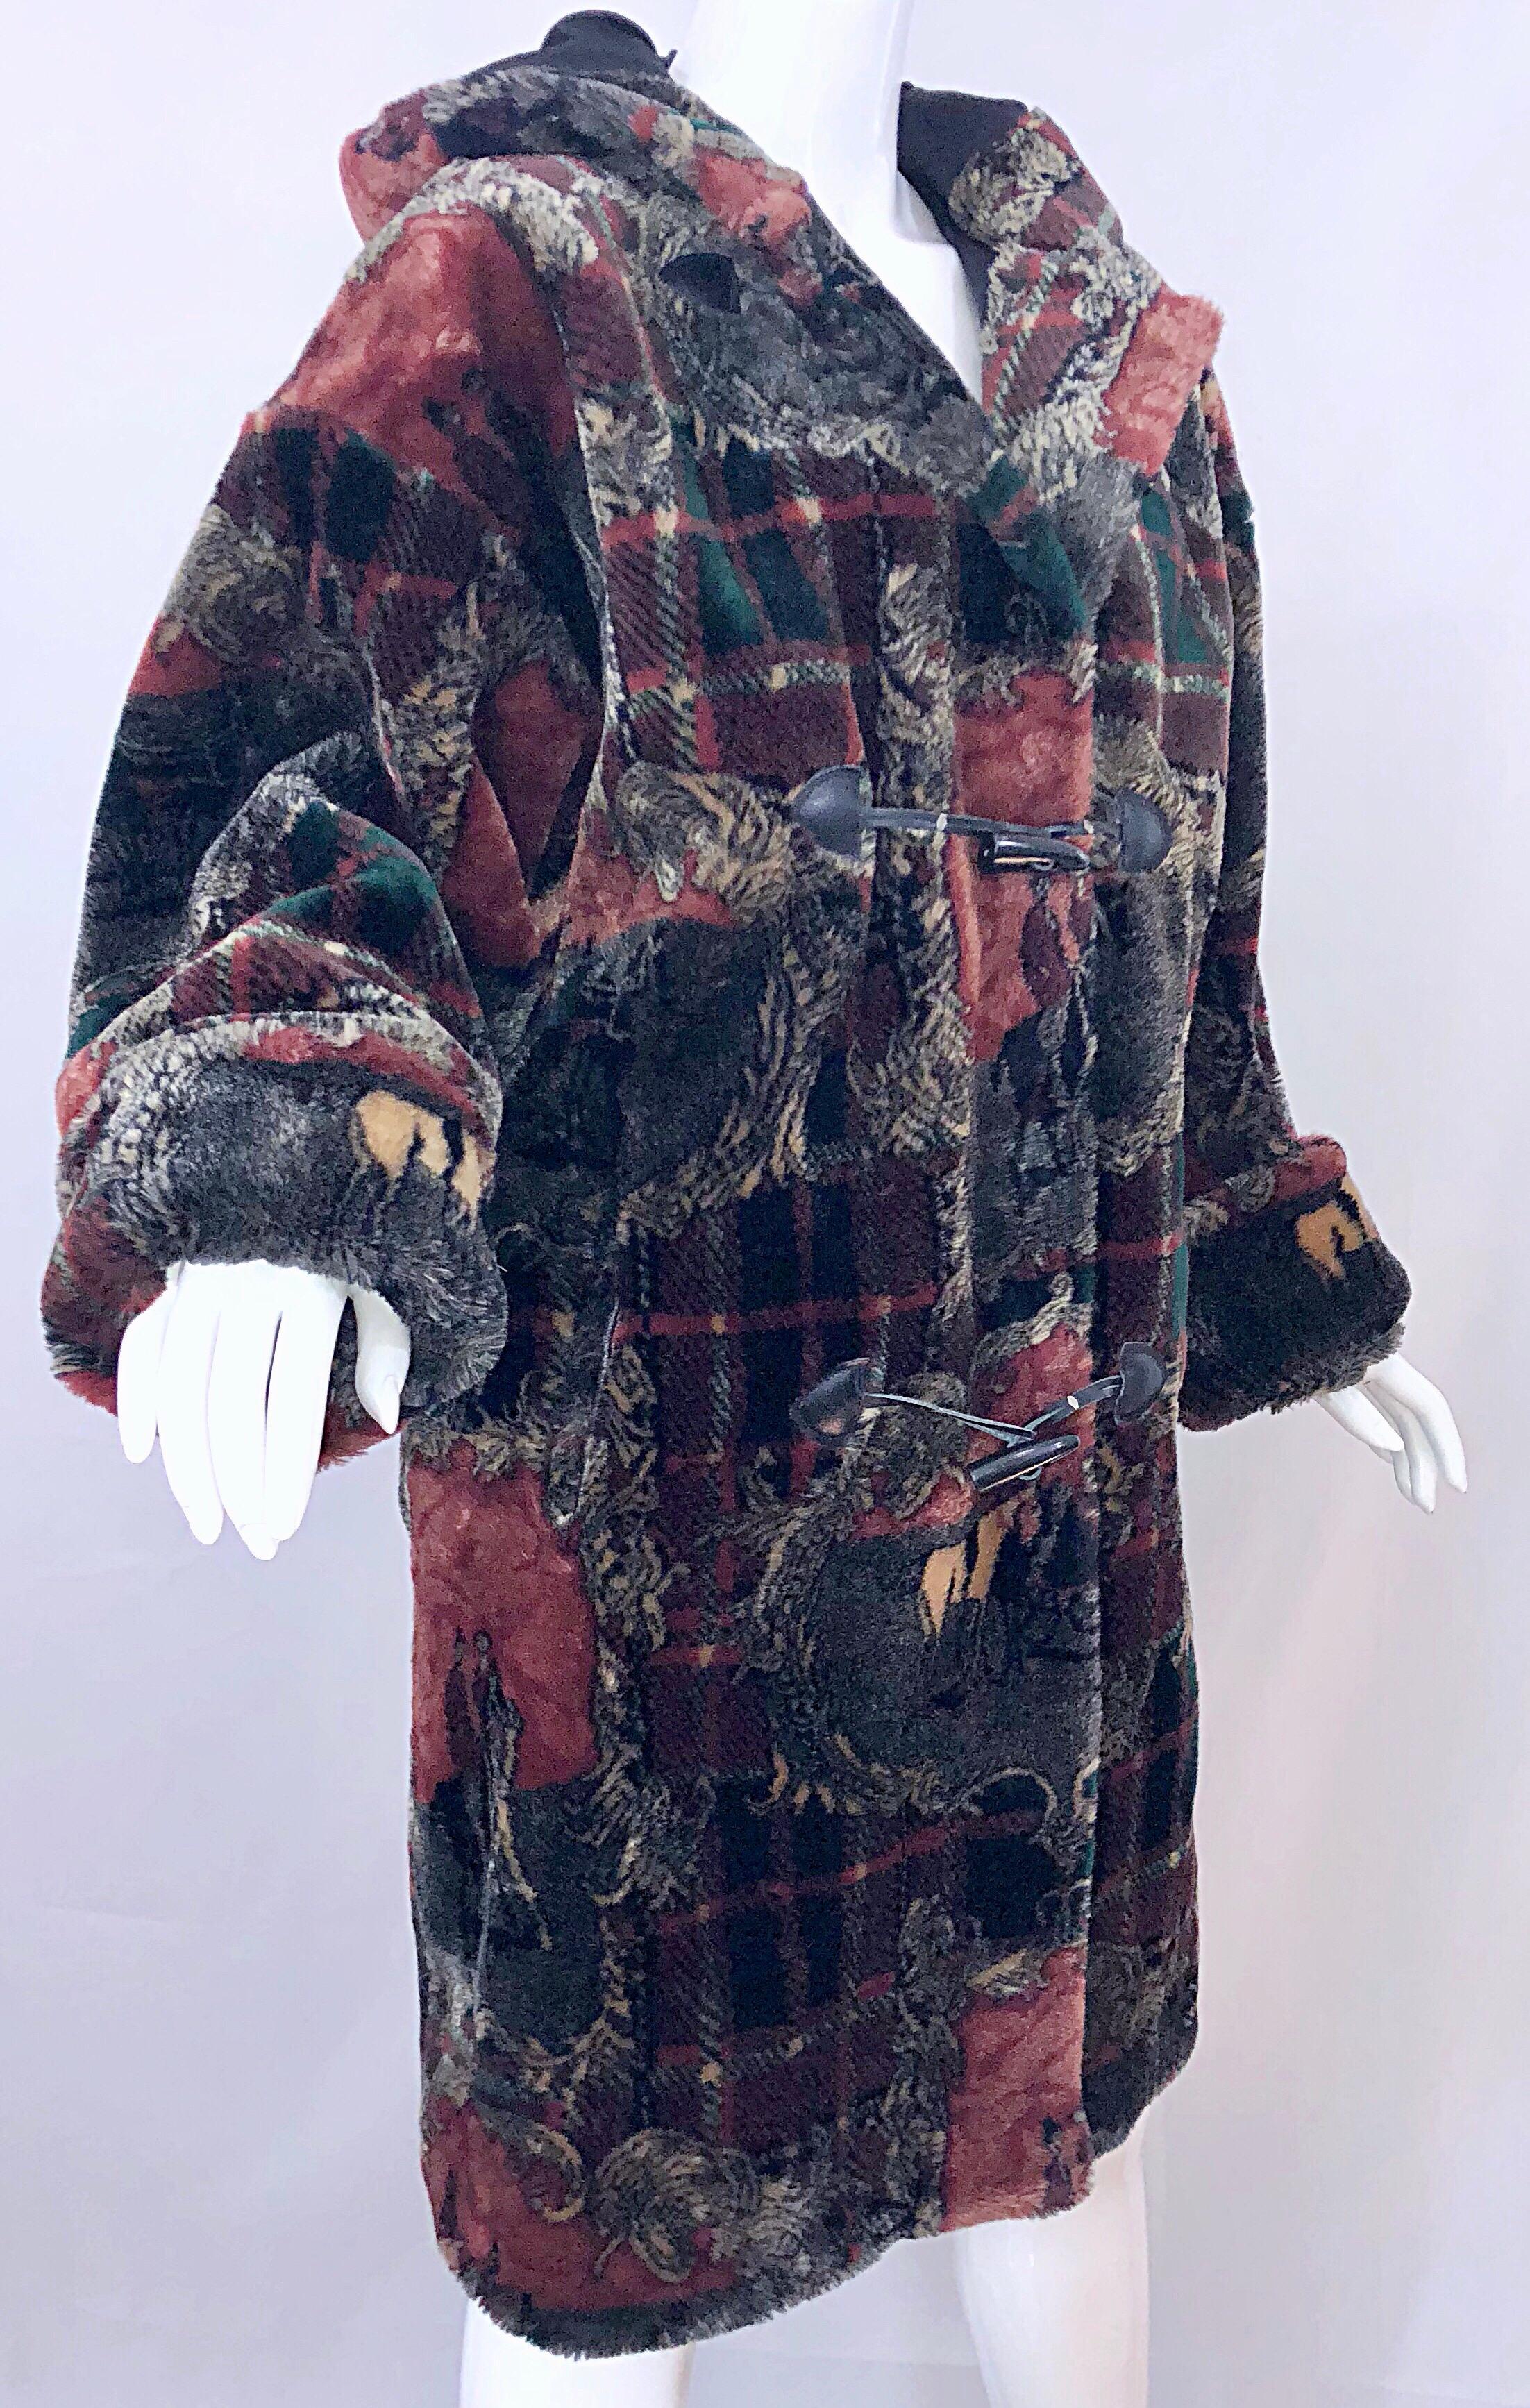 Extra Plush Vintage Faux Fur Equestrian Plaid Print Oversized Hooded Jacket In Excellent Condition For Sale In San Diego, CA